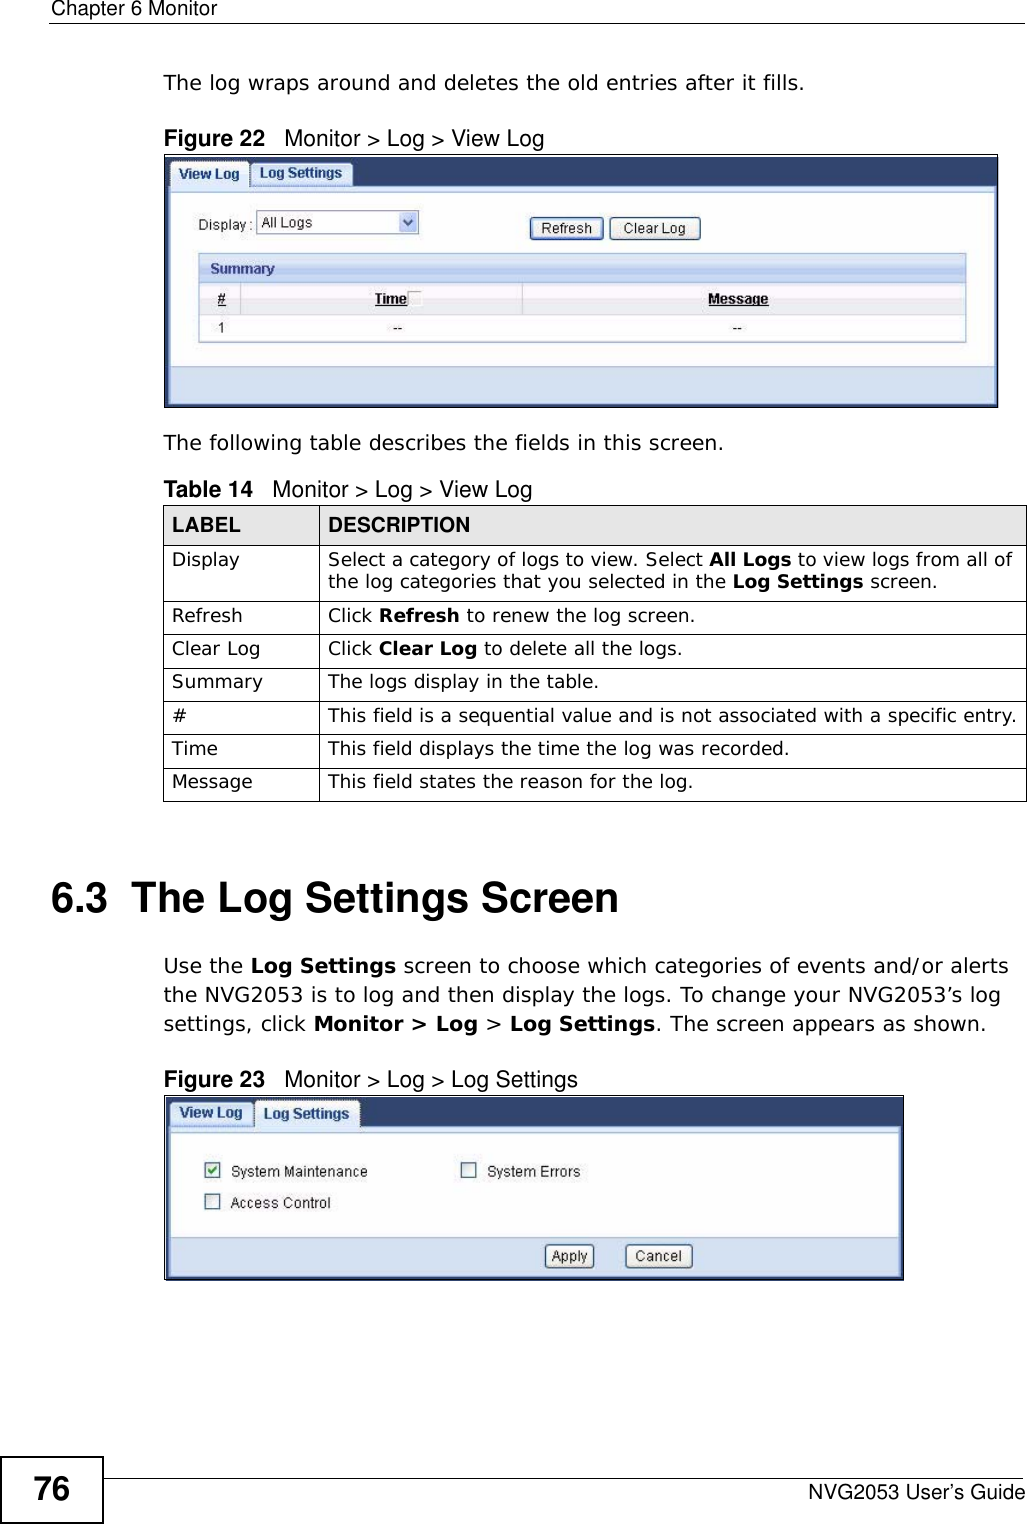 Chapter 6 MonitorNVG2053 User’s Guide76The log wraps around and deletes the old entries after it fills.Figure 22   Monitor &gt; Log &gt; View LogThe following table describes the fields in this screen.  6.3  The Log Settings Screen Use the Log Settings screen to choose which categories of events and/or alerts the NVG2053 is to log and then display the logs. To change your NVG2053’s log settings, click Monitor &gt; Log &gt; Log Settings. The screen appears as shown.Figure 23   Monitor &gt; Log &gt; Log SettingsTable 14   Monitor &gt; Log &gt; View LogLABEL DESCRIPTIONDisplay  Select a category of logs to view. Select All Logs to view logs from all of the log categories that you selected in the Log Settings screen.Refresh Click Refresh to renew the log screen.Clear Log Click Clear Log to delete all the logs.Summary The logs display in the table. #This field is a sequential value and is not associated with a specific entry.Time  This field displays the time the log was recorded. Message This field states the reason for the log.